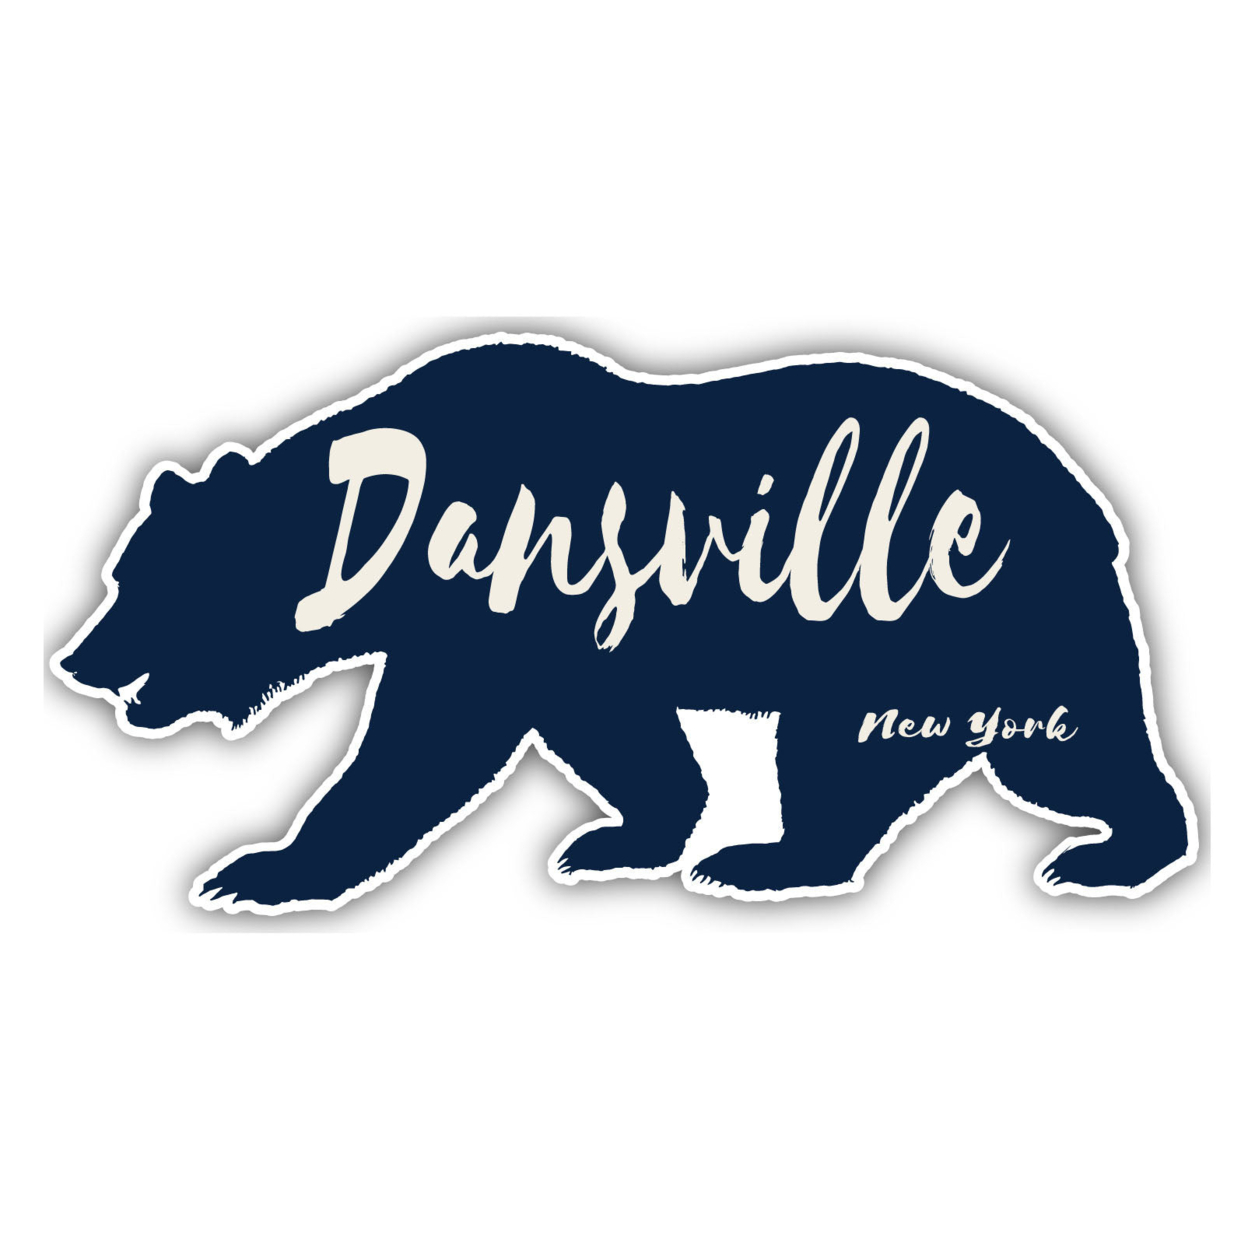 Dansville New York Souvenir Decorative Stickers (Choose Theme And Size) - 4-Pack, 6-Inch, Bear